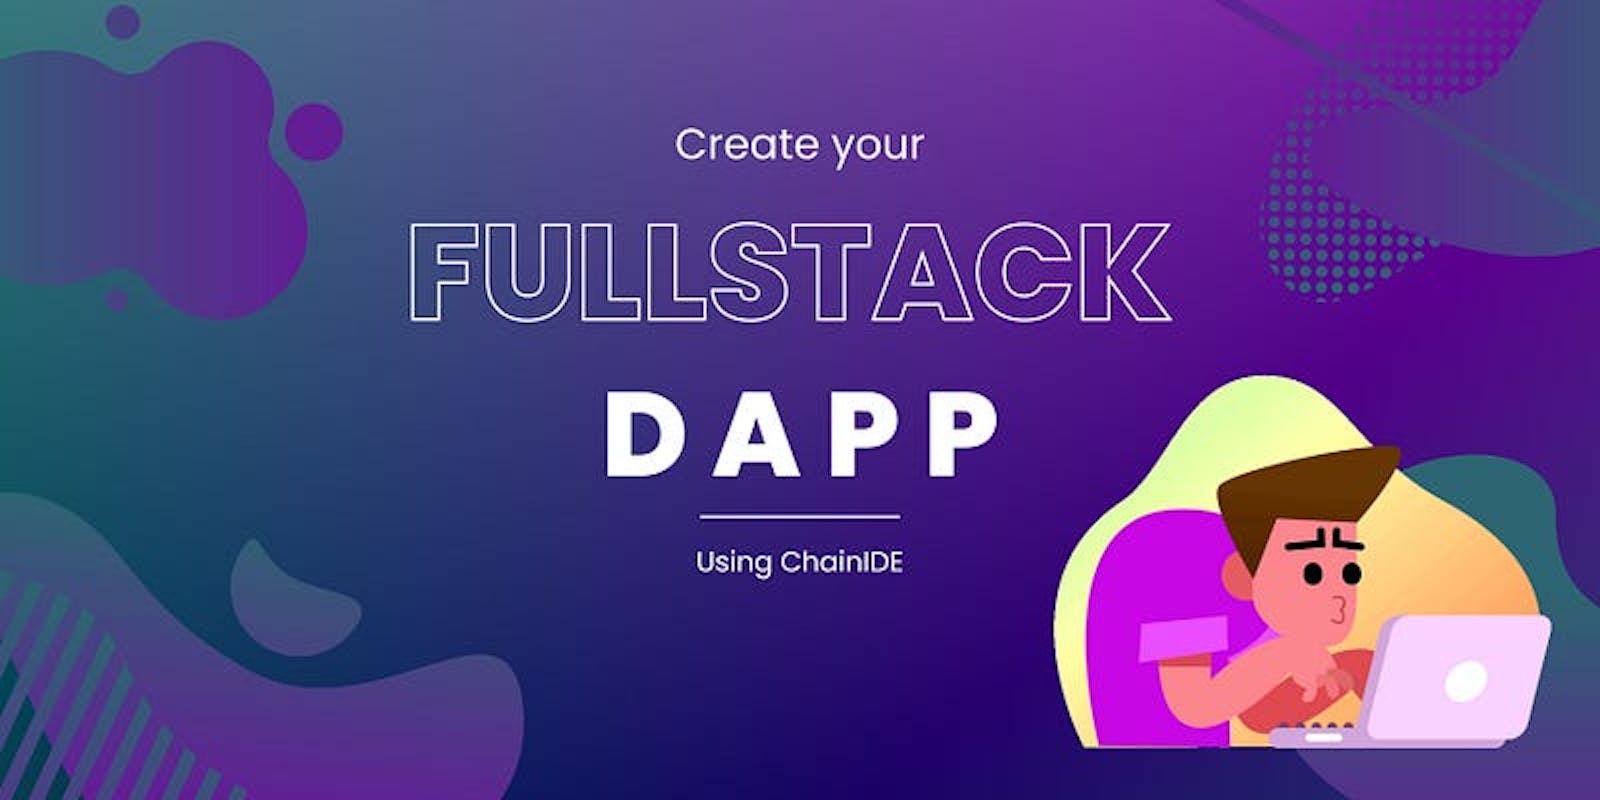 ChainIDE for Full-Stack Developers: How to Build a Full-Stack dApp from Scratch?